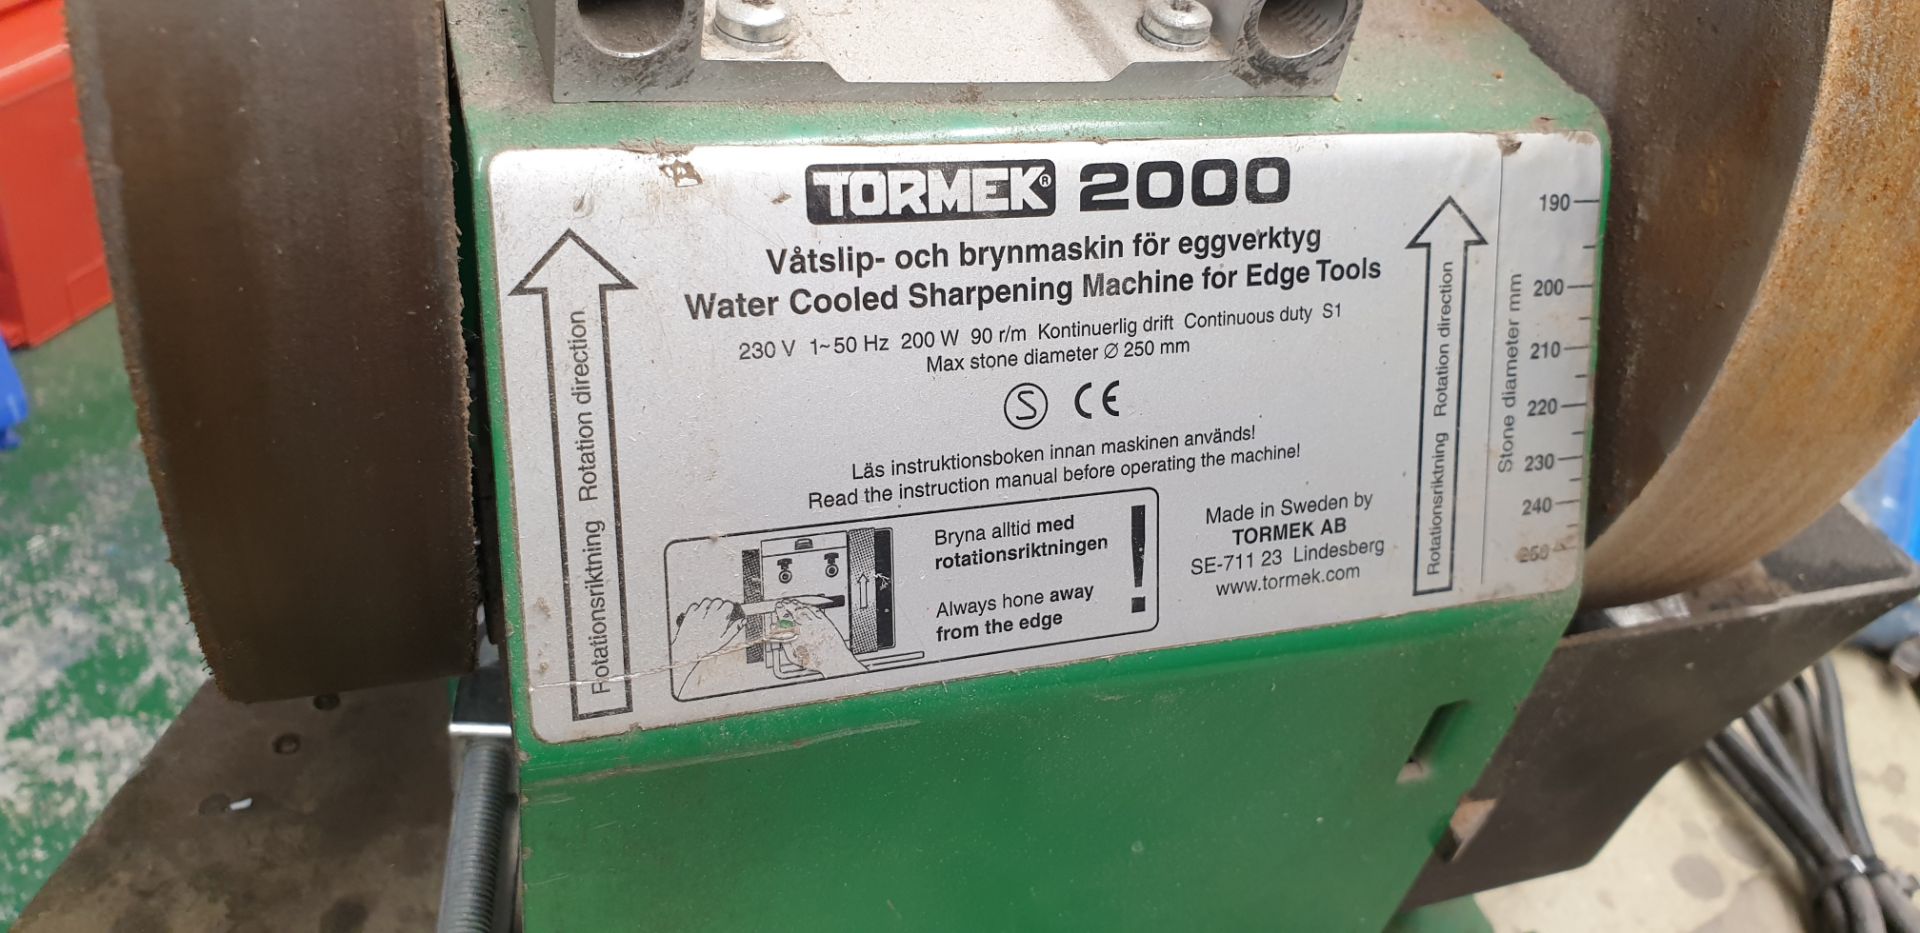 1: Tormek 2000 Water Cooled Sharpening Machine for Edge Tools - Image 3 of 3